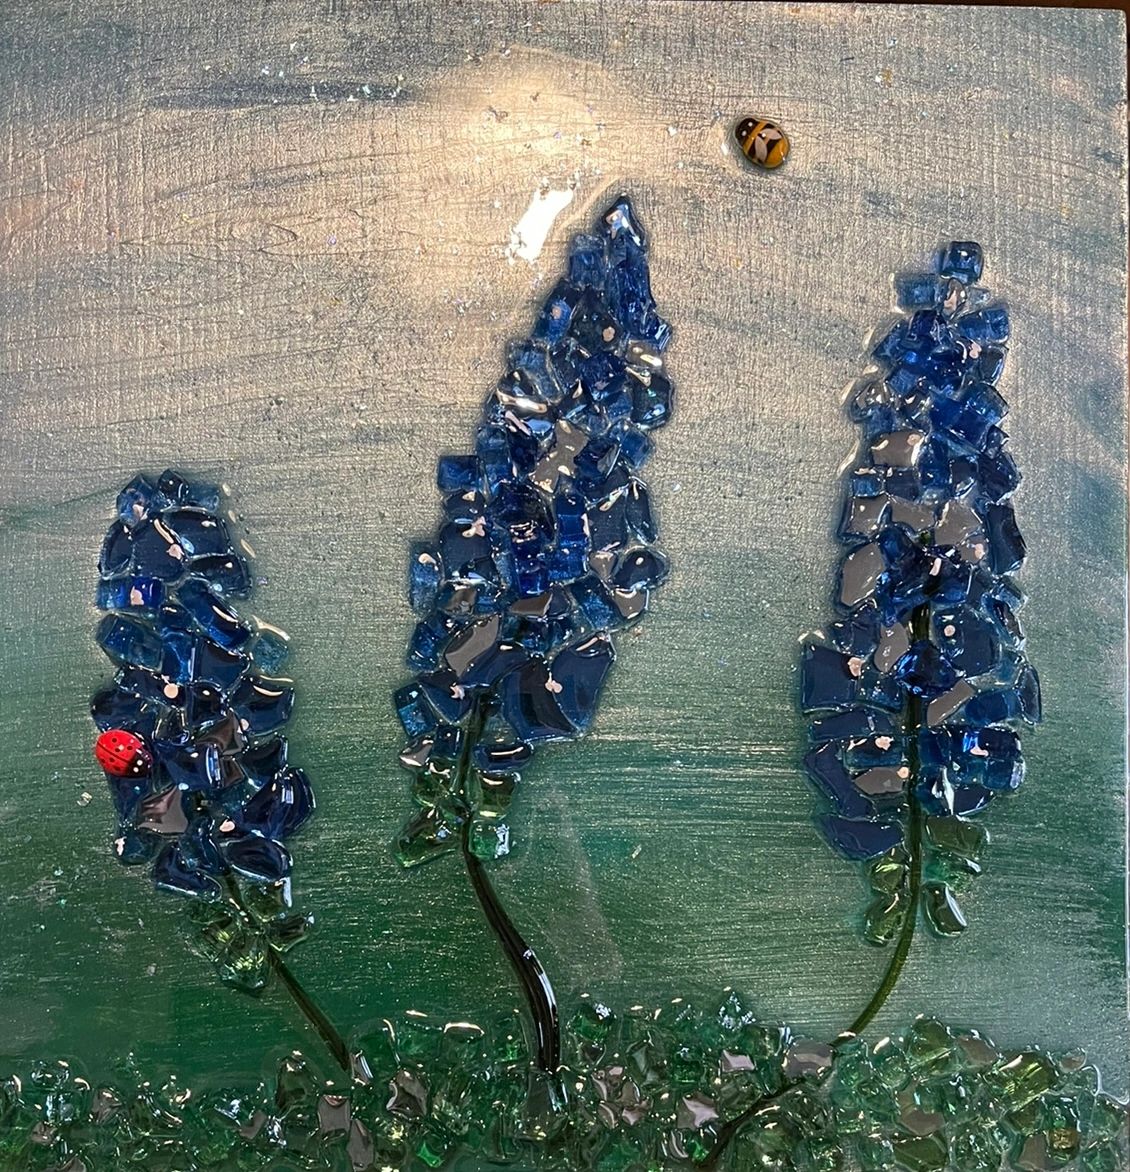 Spring Time in Texas. Resin and glass original art - 10x10 wood canvas. Texas Bluebonnets